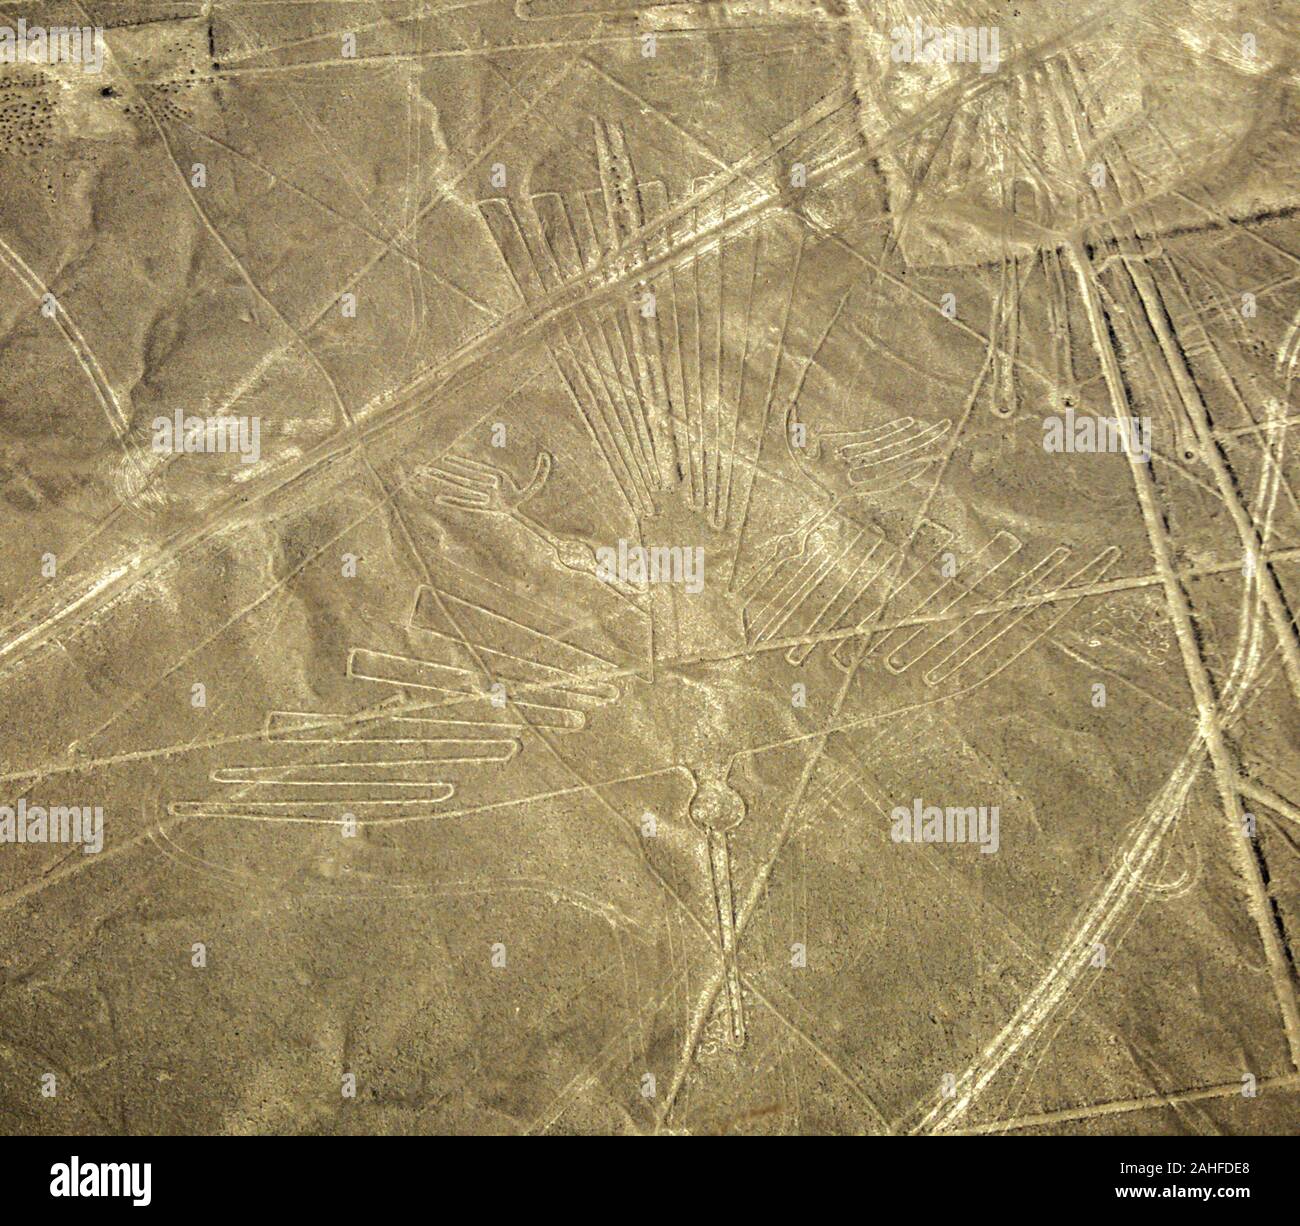 Aerial view of the Condor. The Nazca Lines are a group of very large geoglyphs formed by depressions or shallow incisions made in the soil of the Nazc Stock Photo